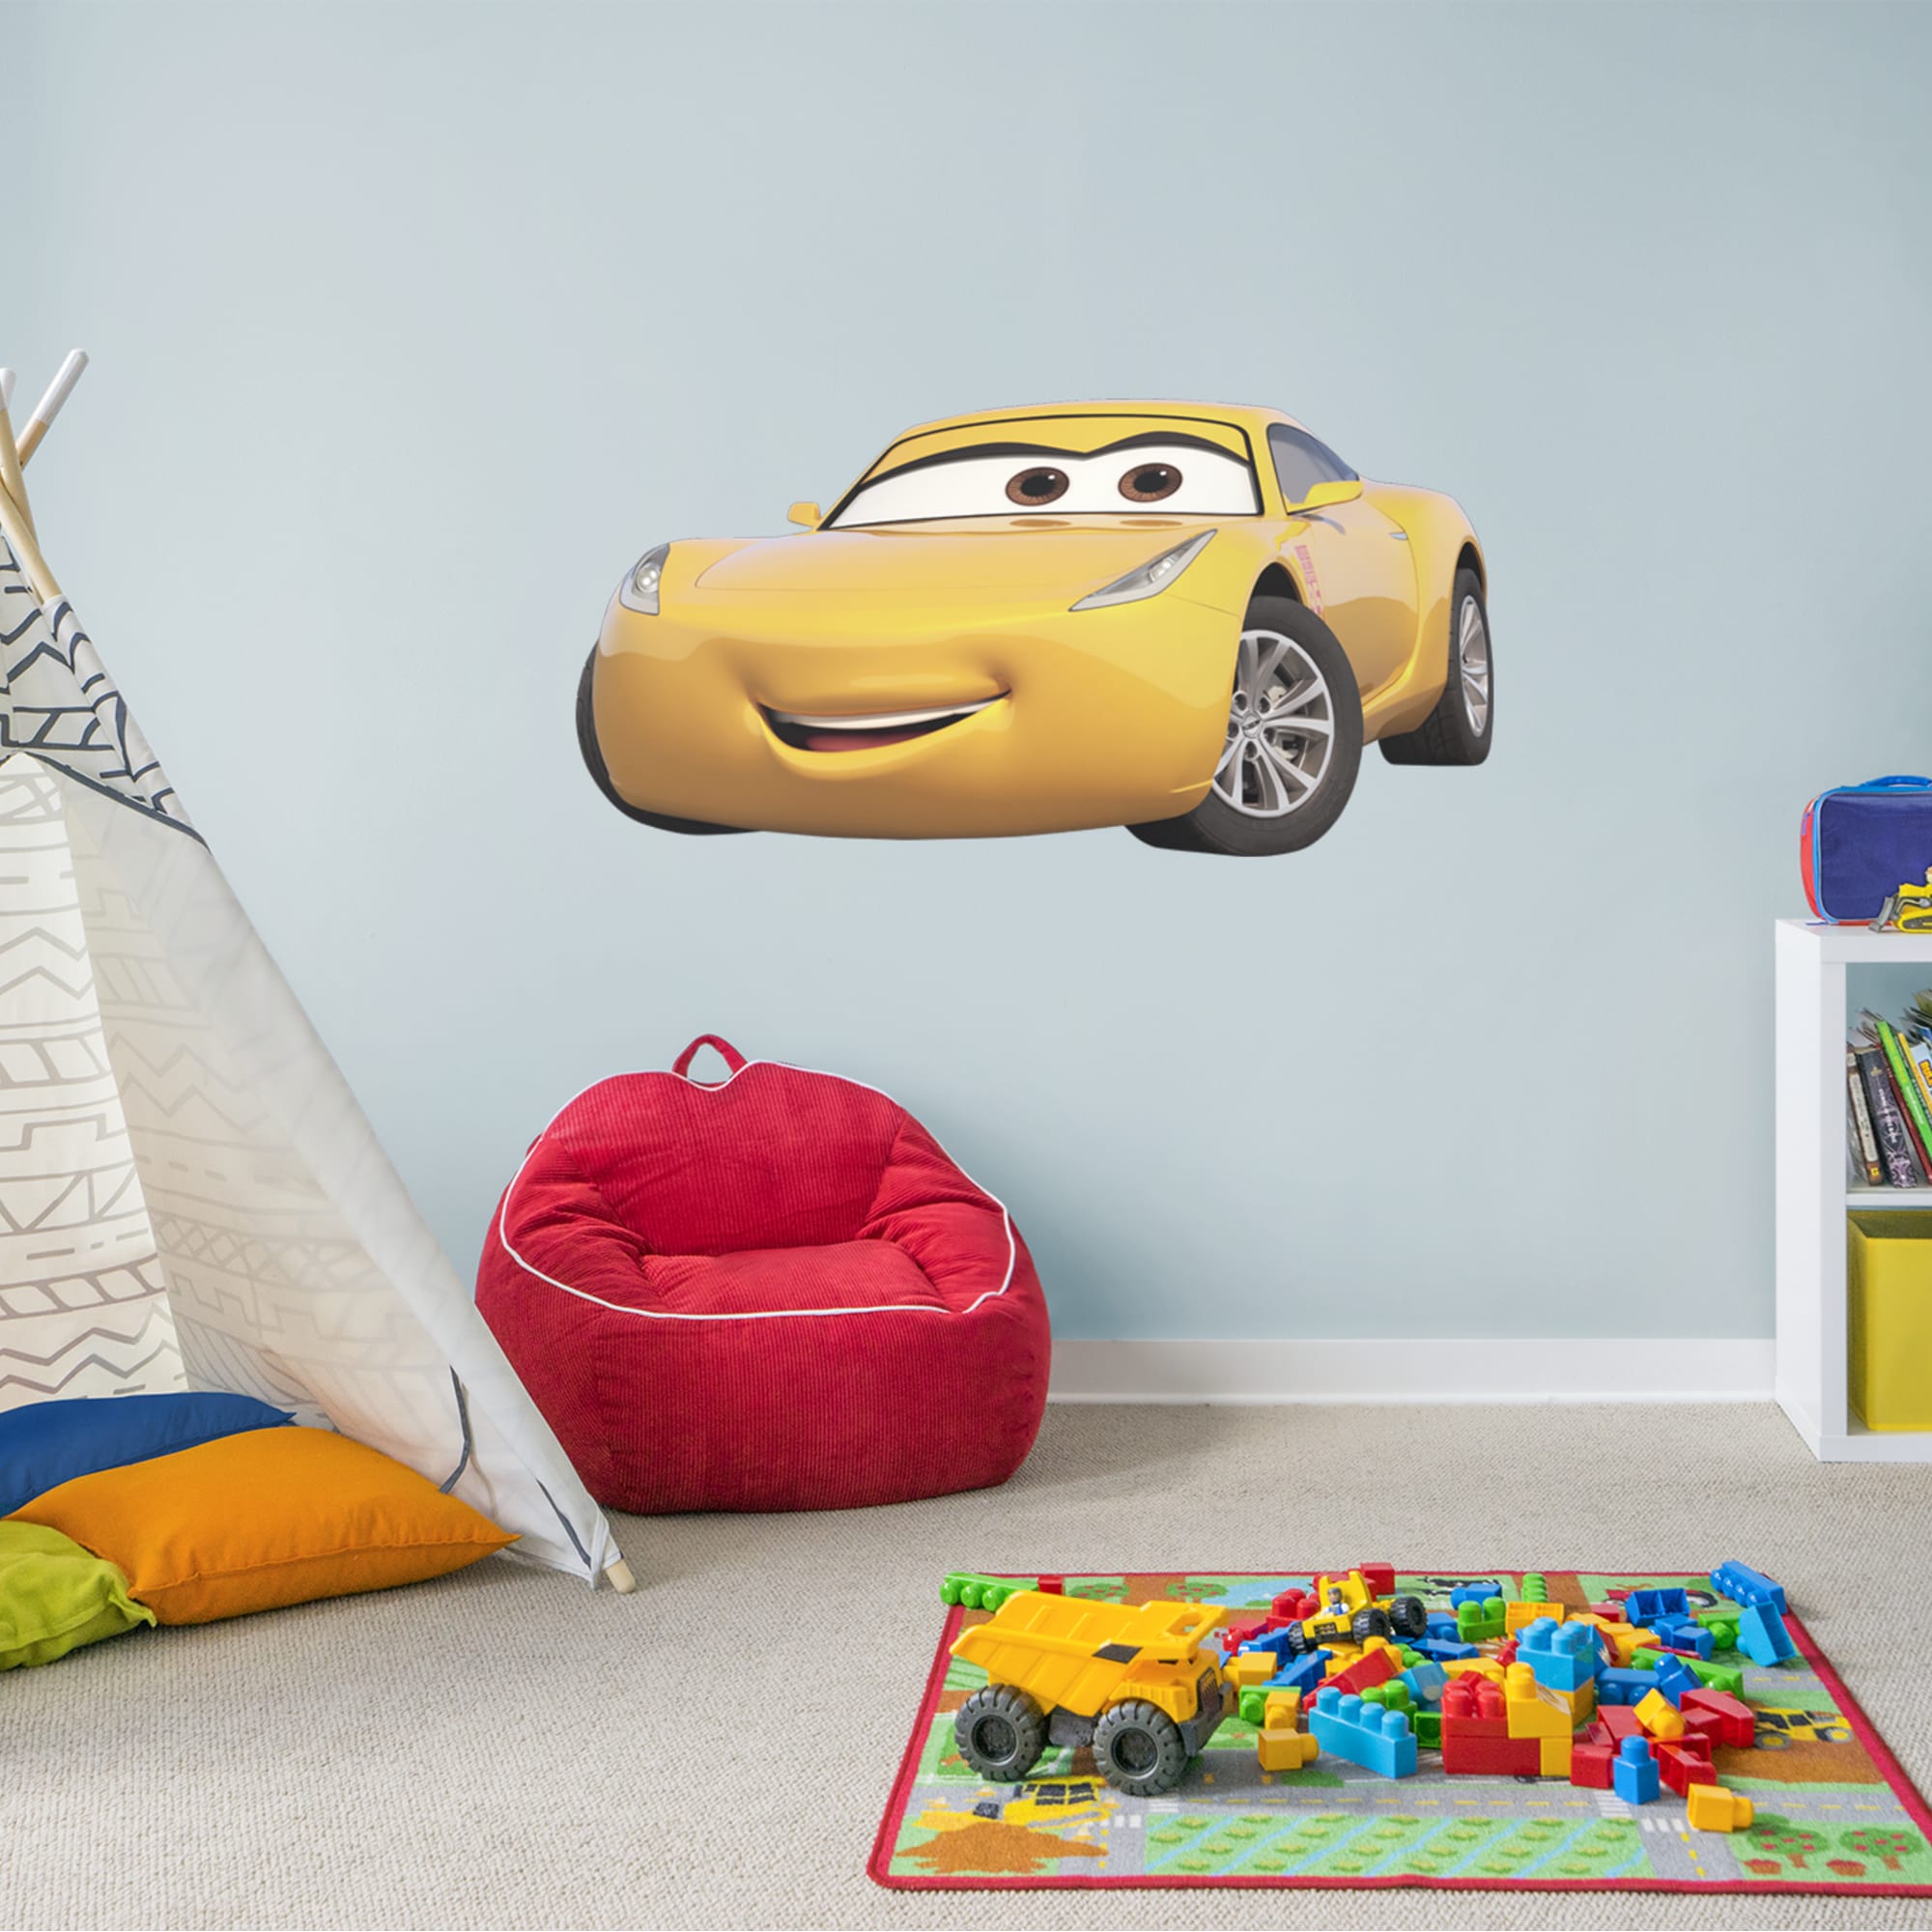 Cruz: Cars 3 - Officially Licensed Disney/PIXAR Removable Wall Graphic 53.0"W x 26.0"H by Fathead | Vinyl